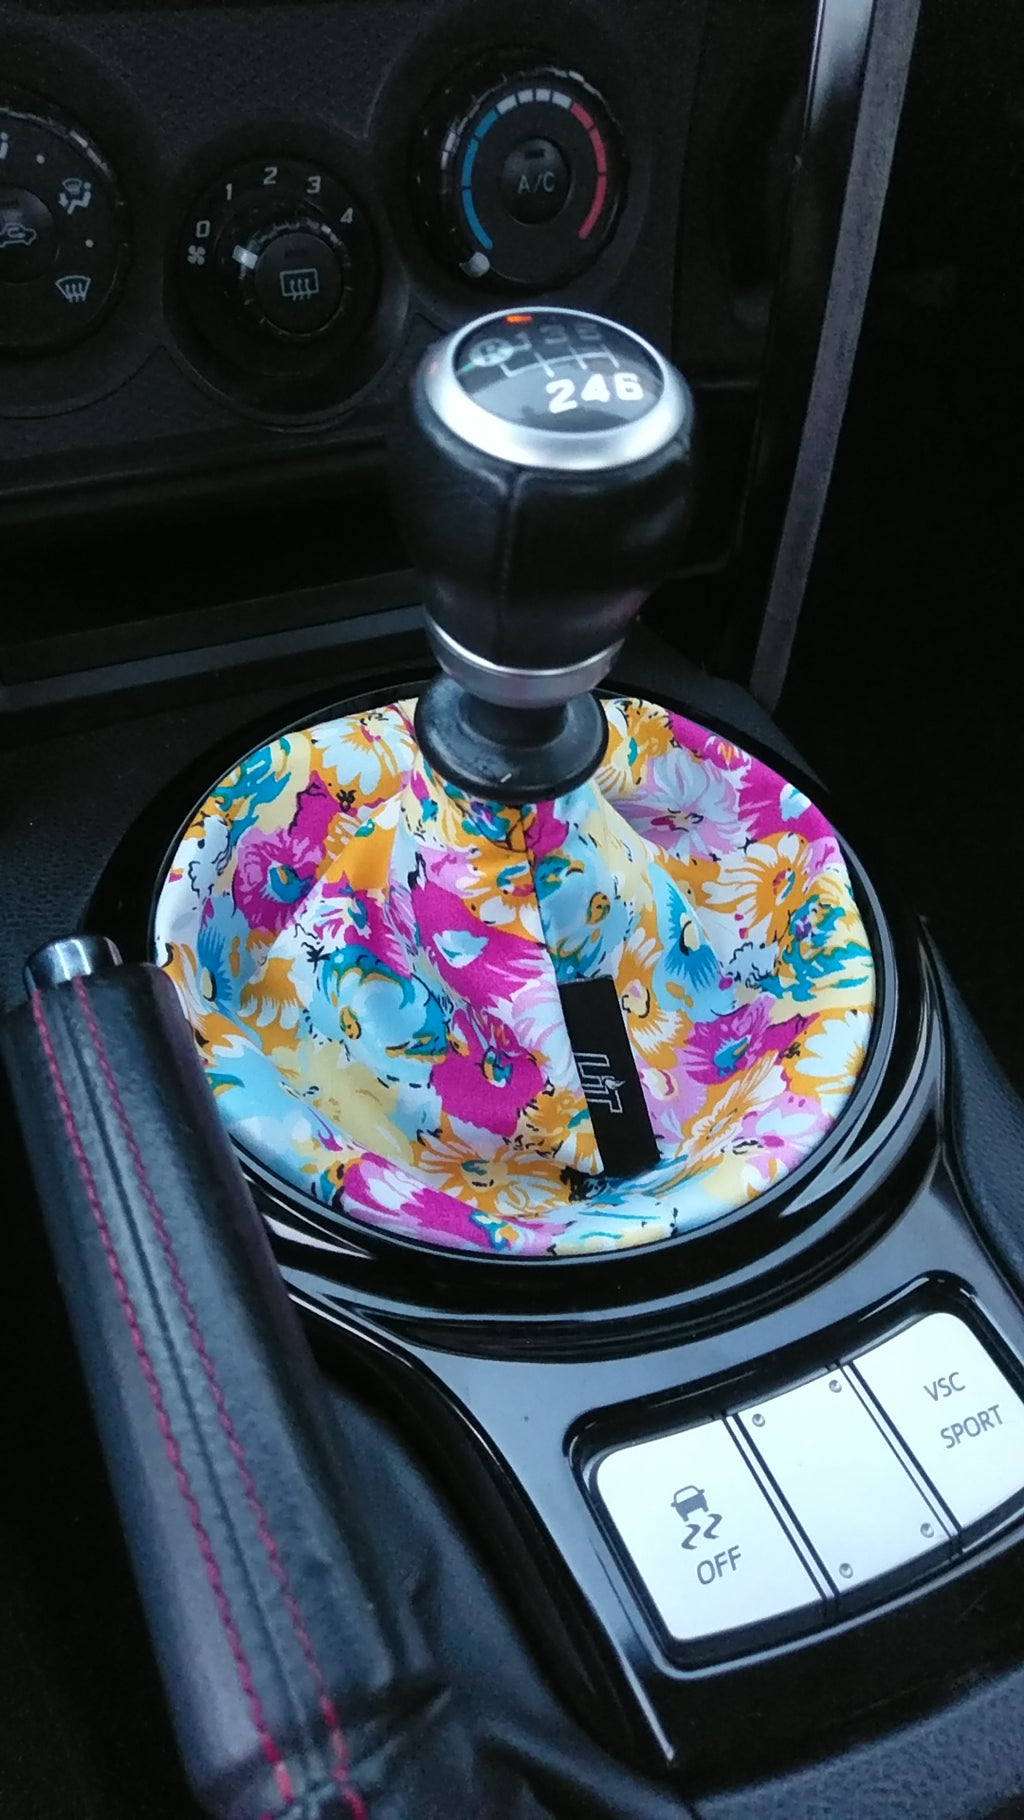 floral shift boot , shift boot cover , shift boot cover for automatic , shift boot  wrx , shift boot cover gt86 , shift boot and ebrake boot , gear shift boot cover , jdm shift boot cover , gt86 shift boot , brz shift boot , sti shift boot , gtr shift boot , supra shift boot , silvia s13 shift boot , silvia s14 shift boot , 350z shift boot cover , 370z shift boot , shift boot retainer , shift boot ring , shift boot for cars , evo shift boot cover , dsg shift boot cover , universal shift boot cover 